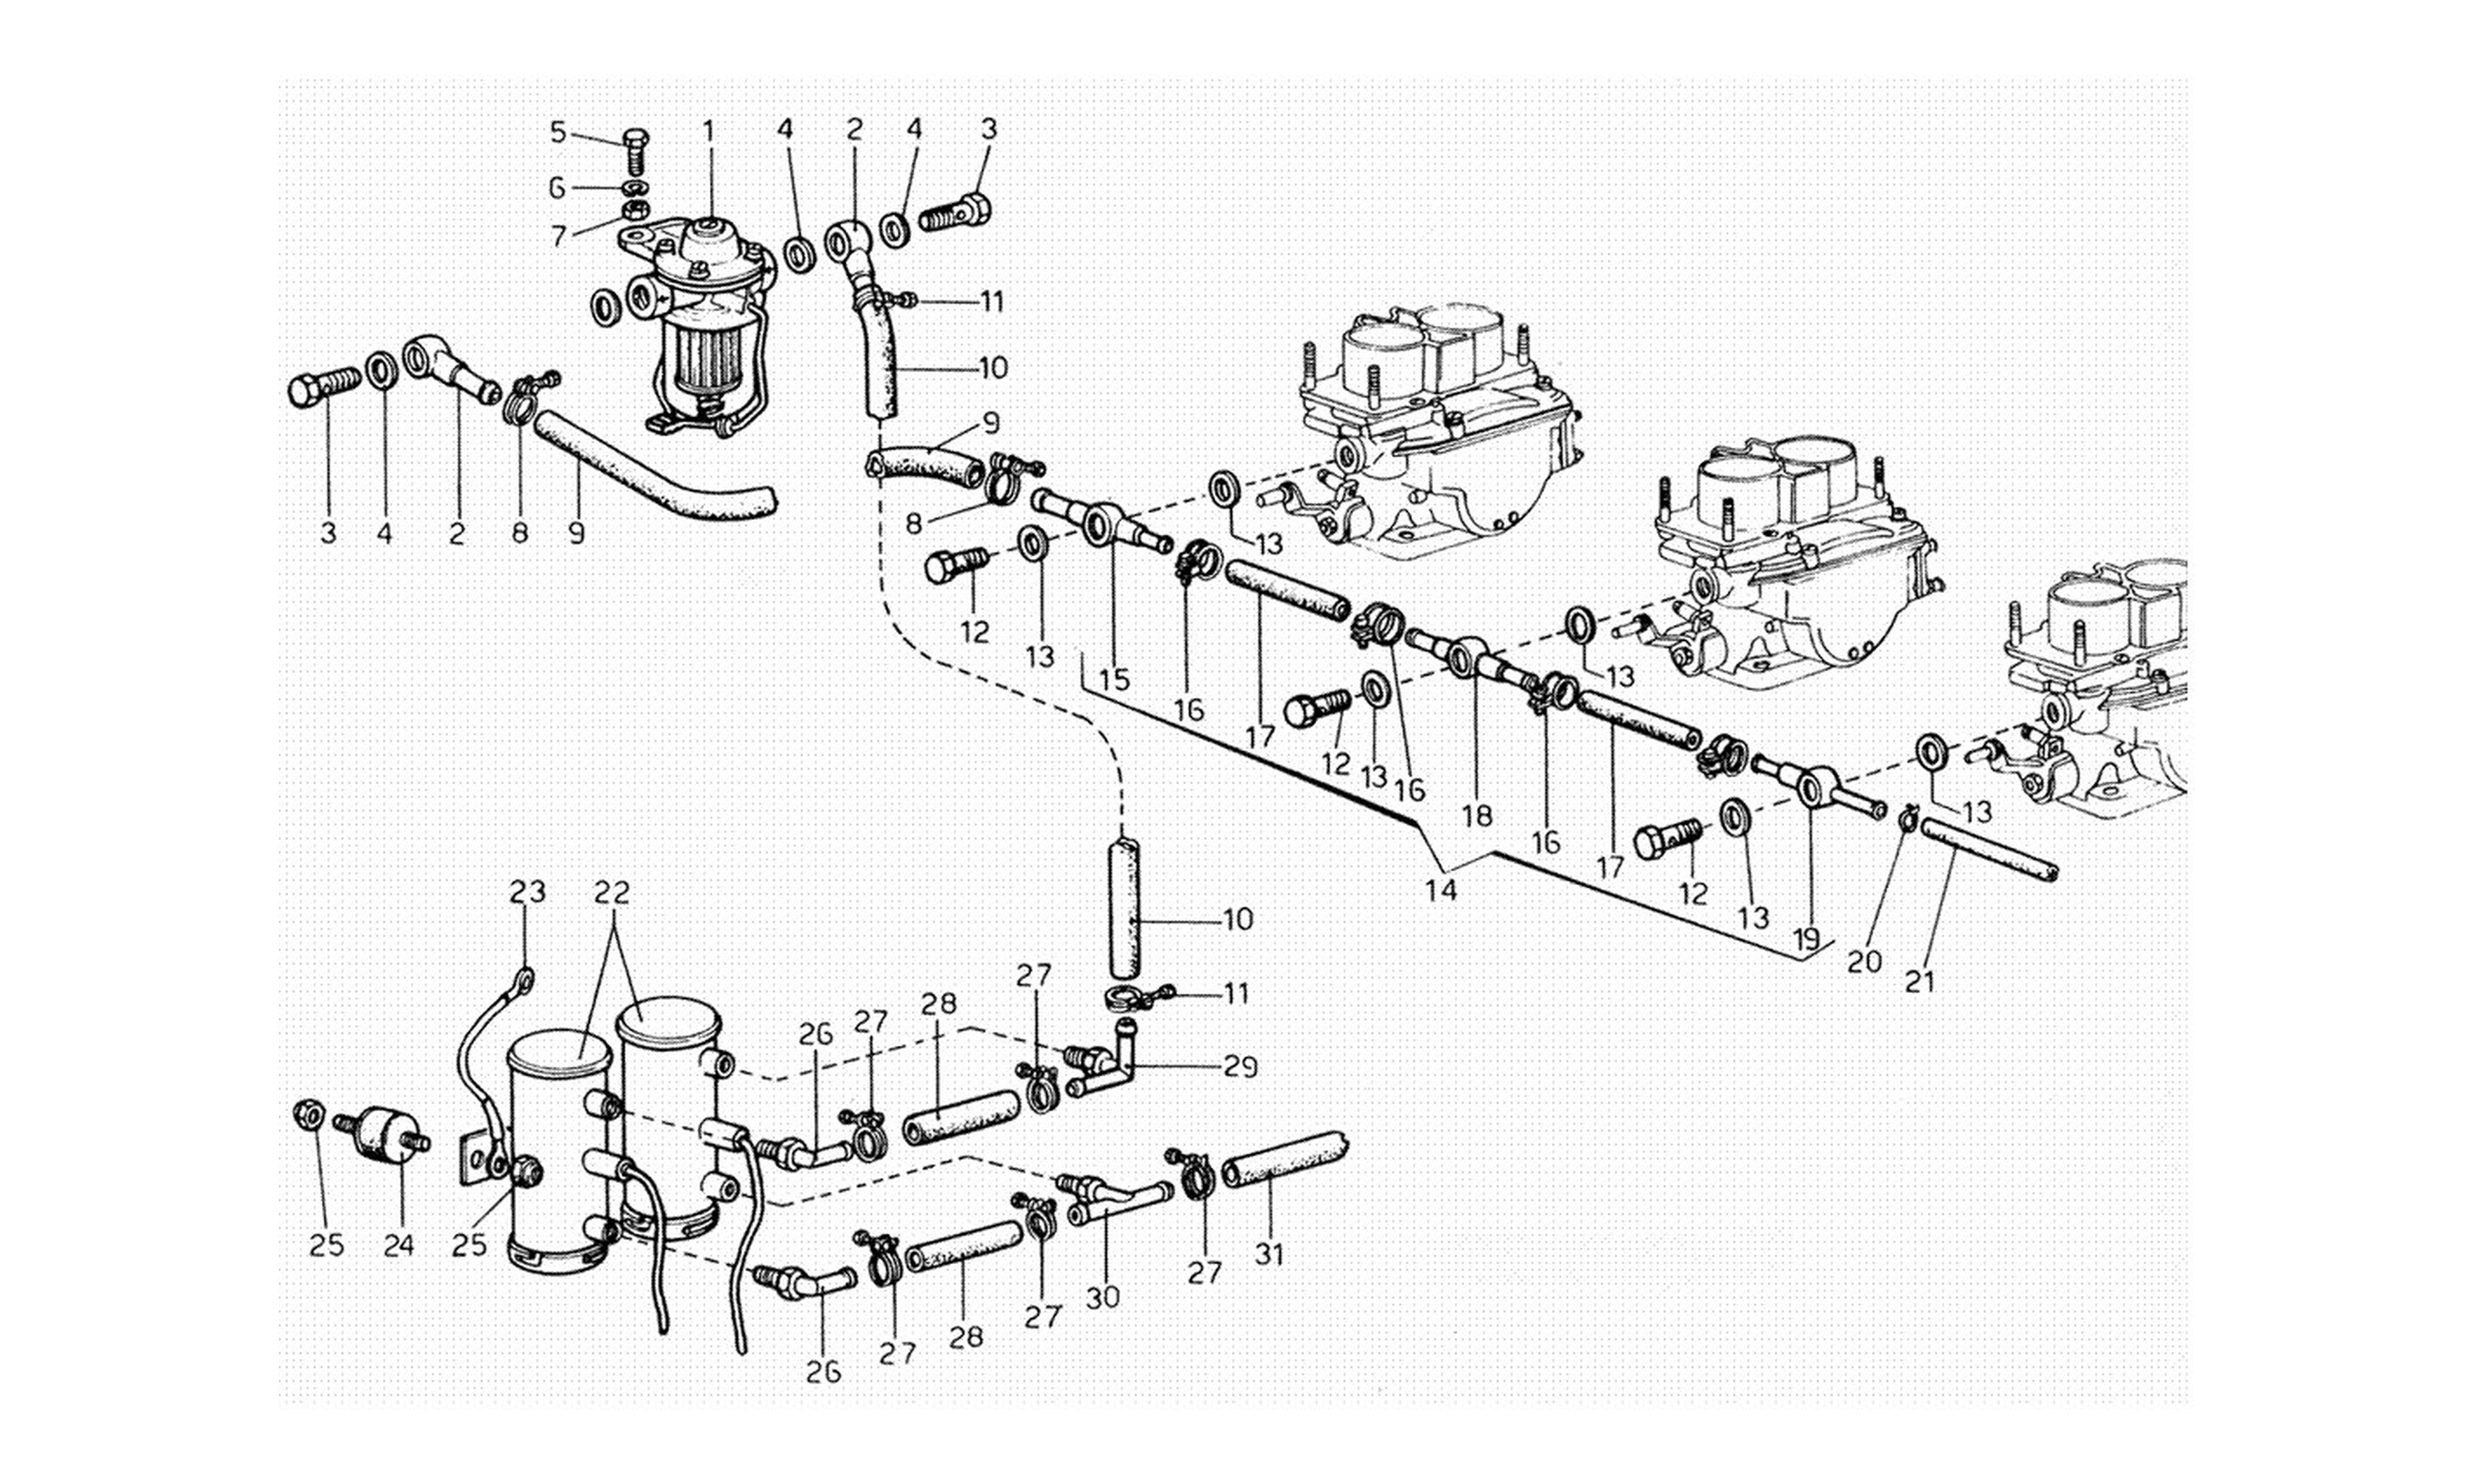 Schematic: Feeding Pumps And Pipes